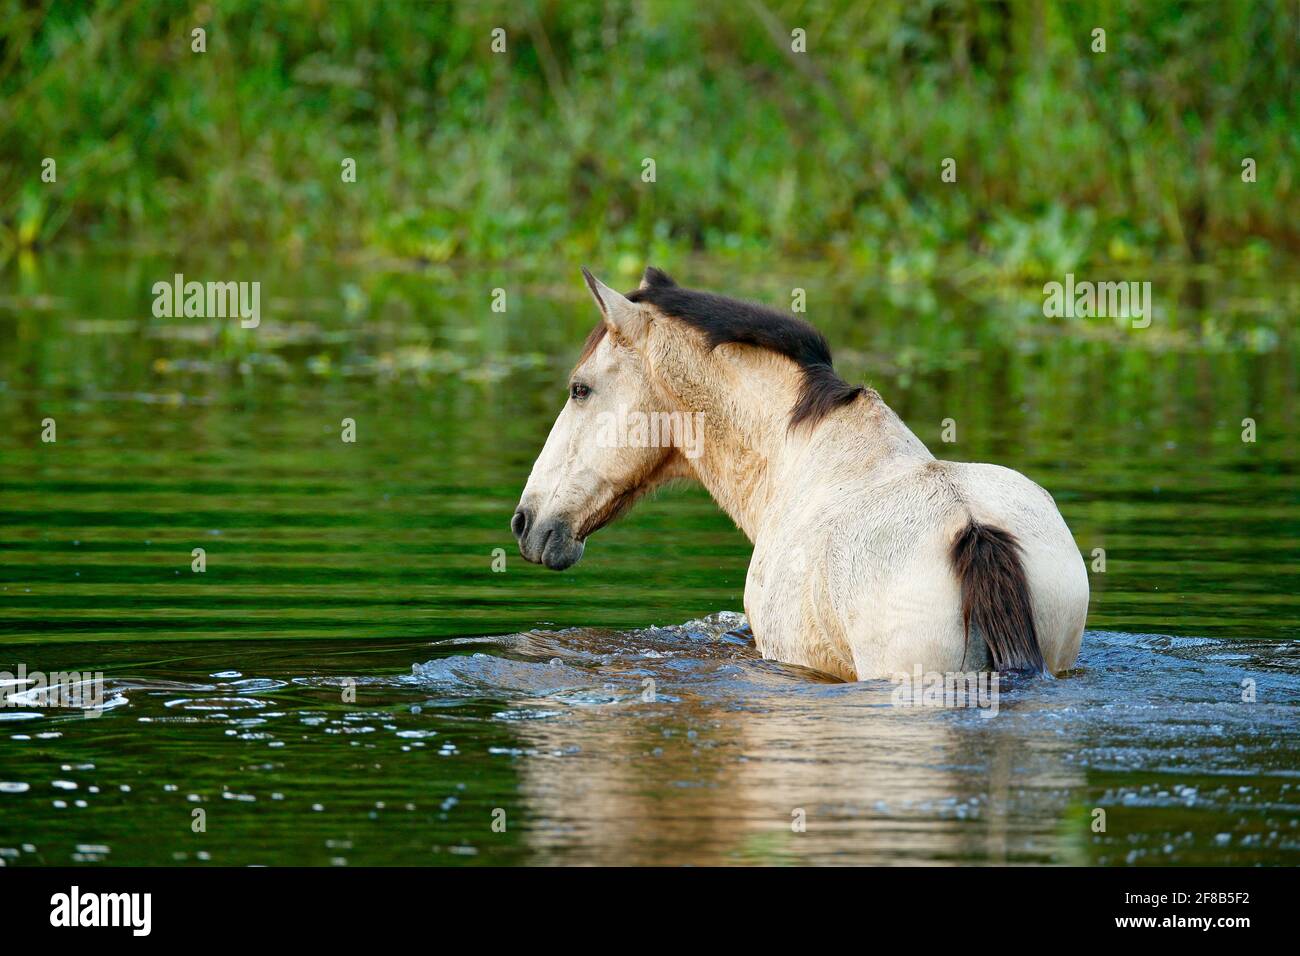 Horse in the river water, Costa Rica. Green vegetation with animal. Agriculture in the Central America. Horse swimming. Stock Photo